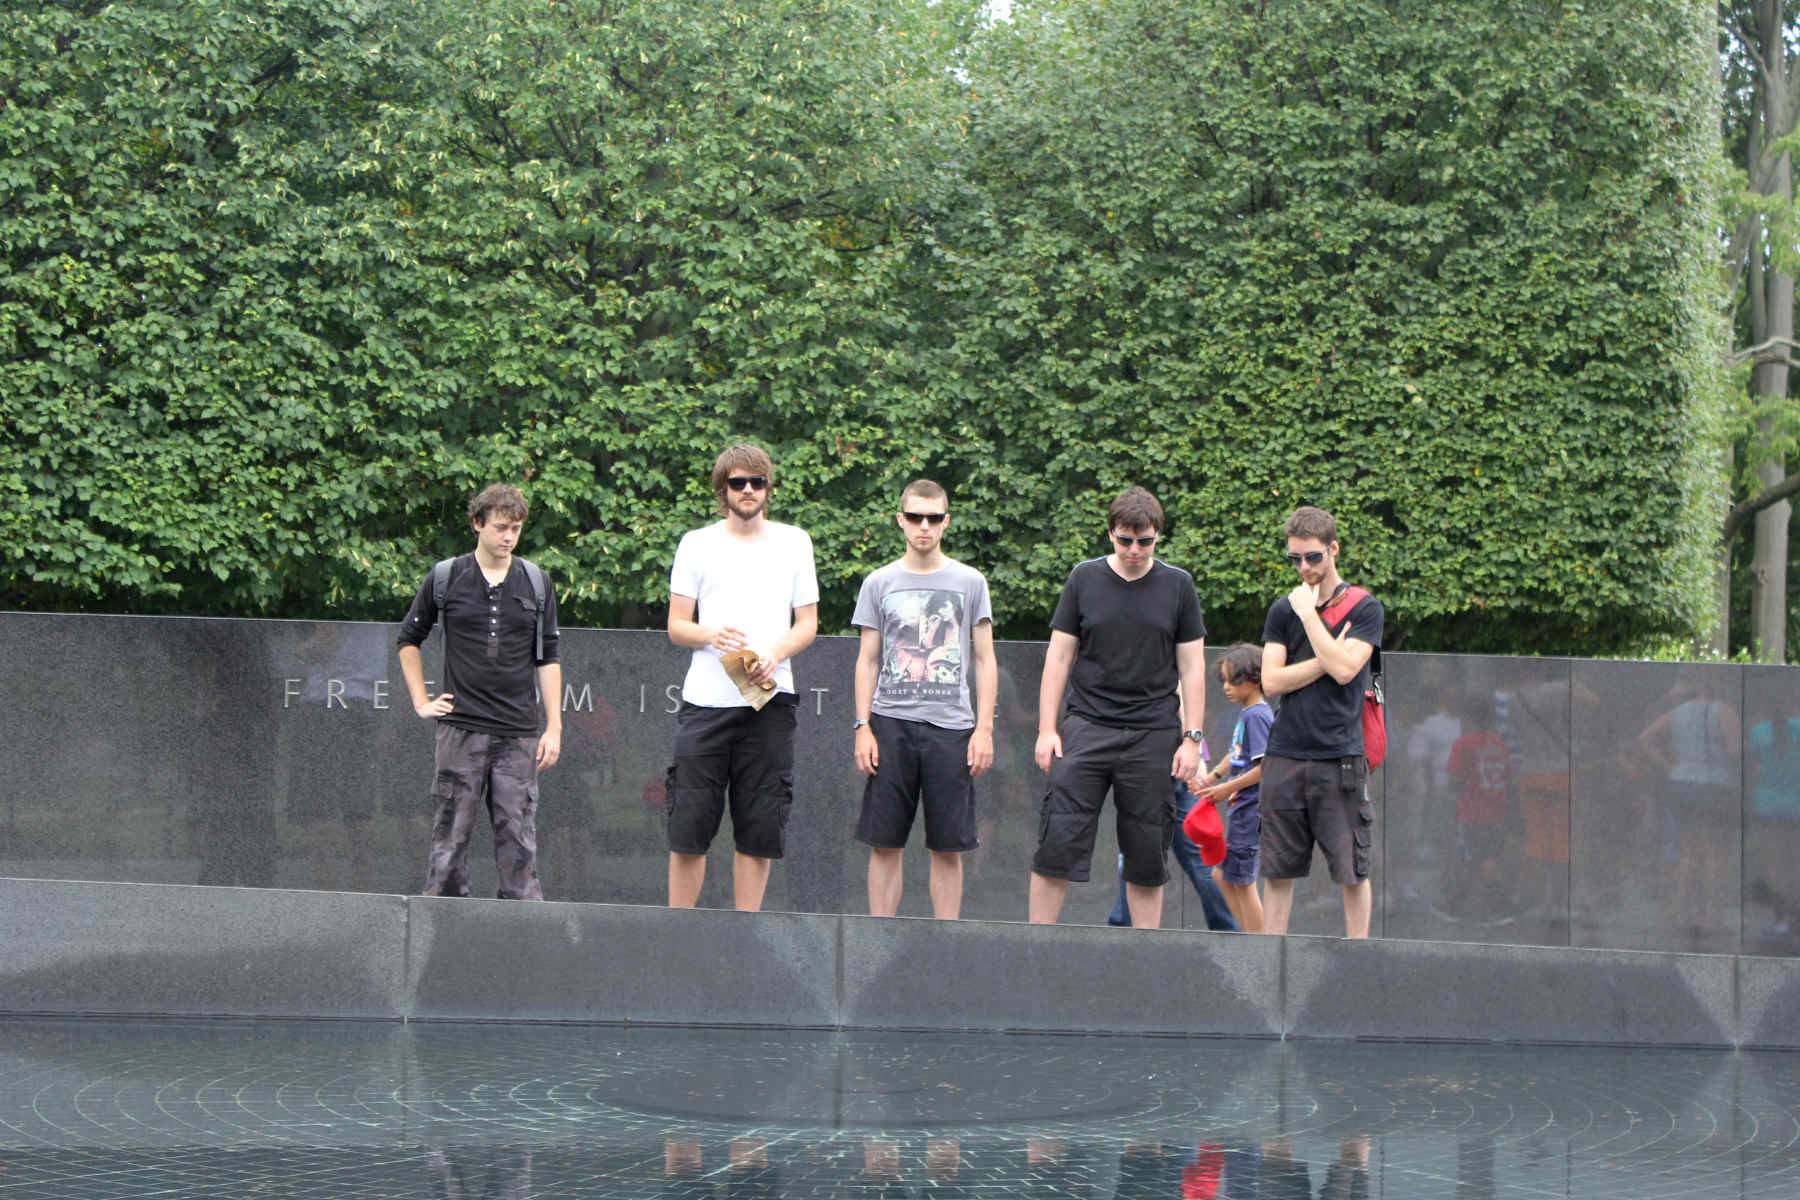 Richard, Butcher, Irwin, Andrew, and Jared at the monument